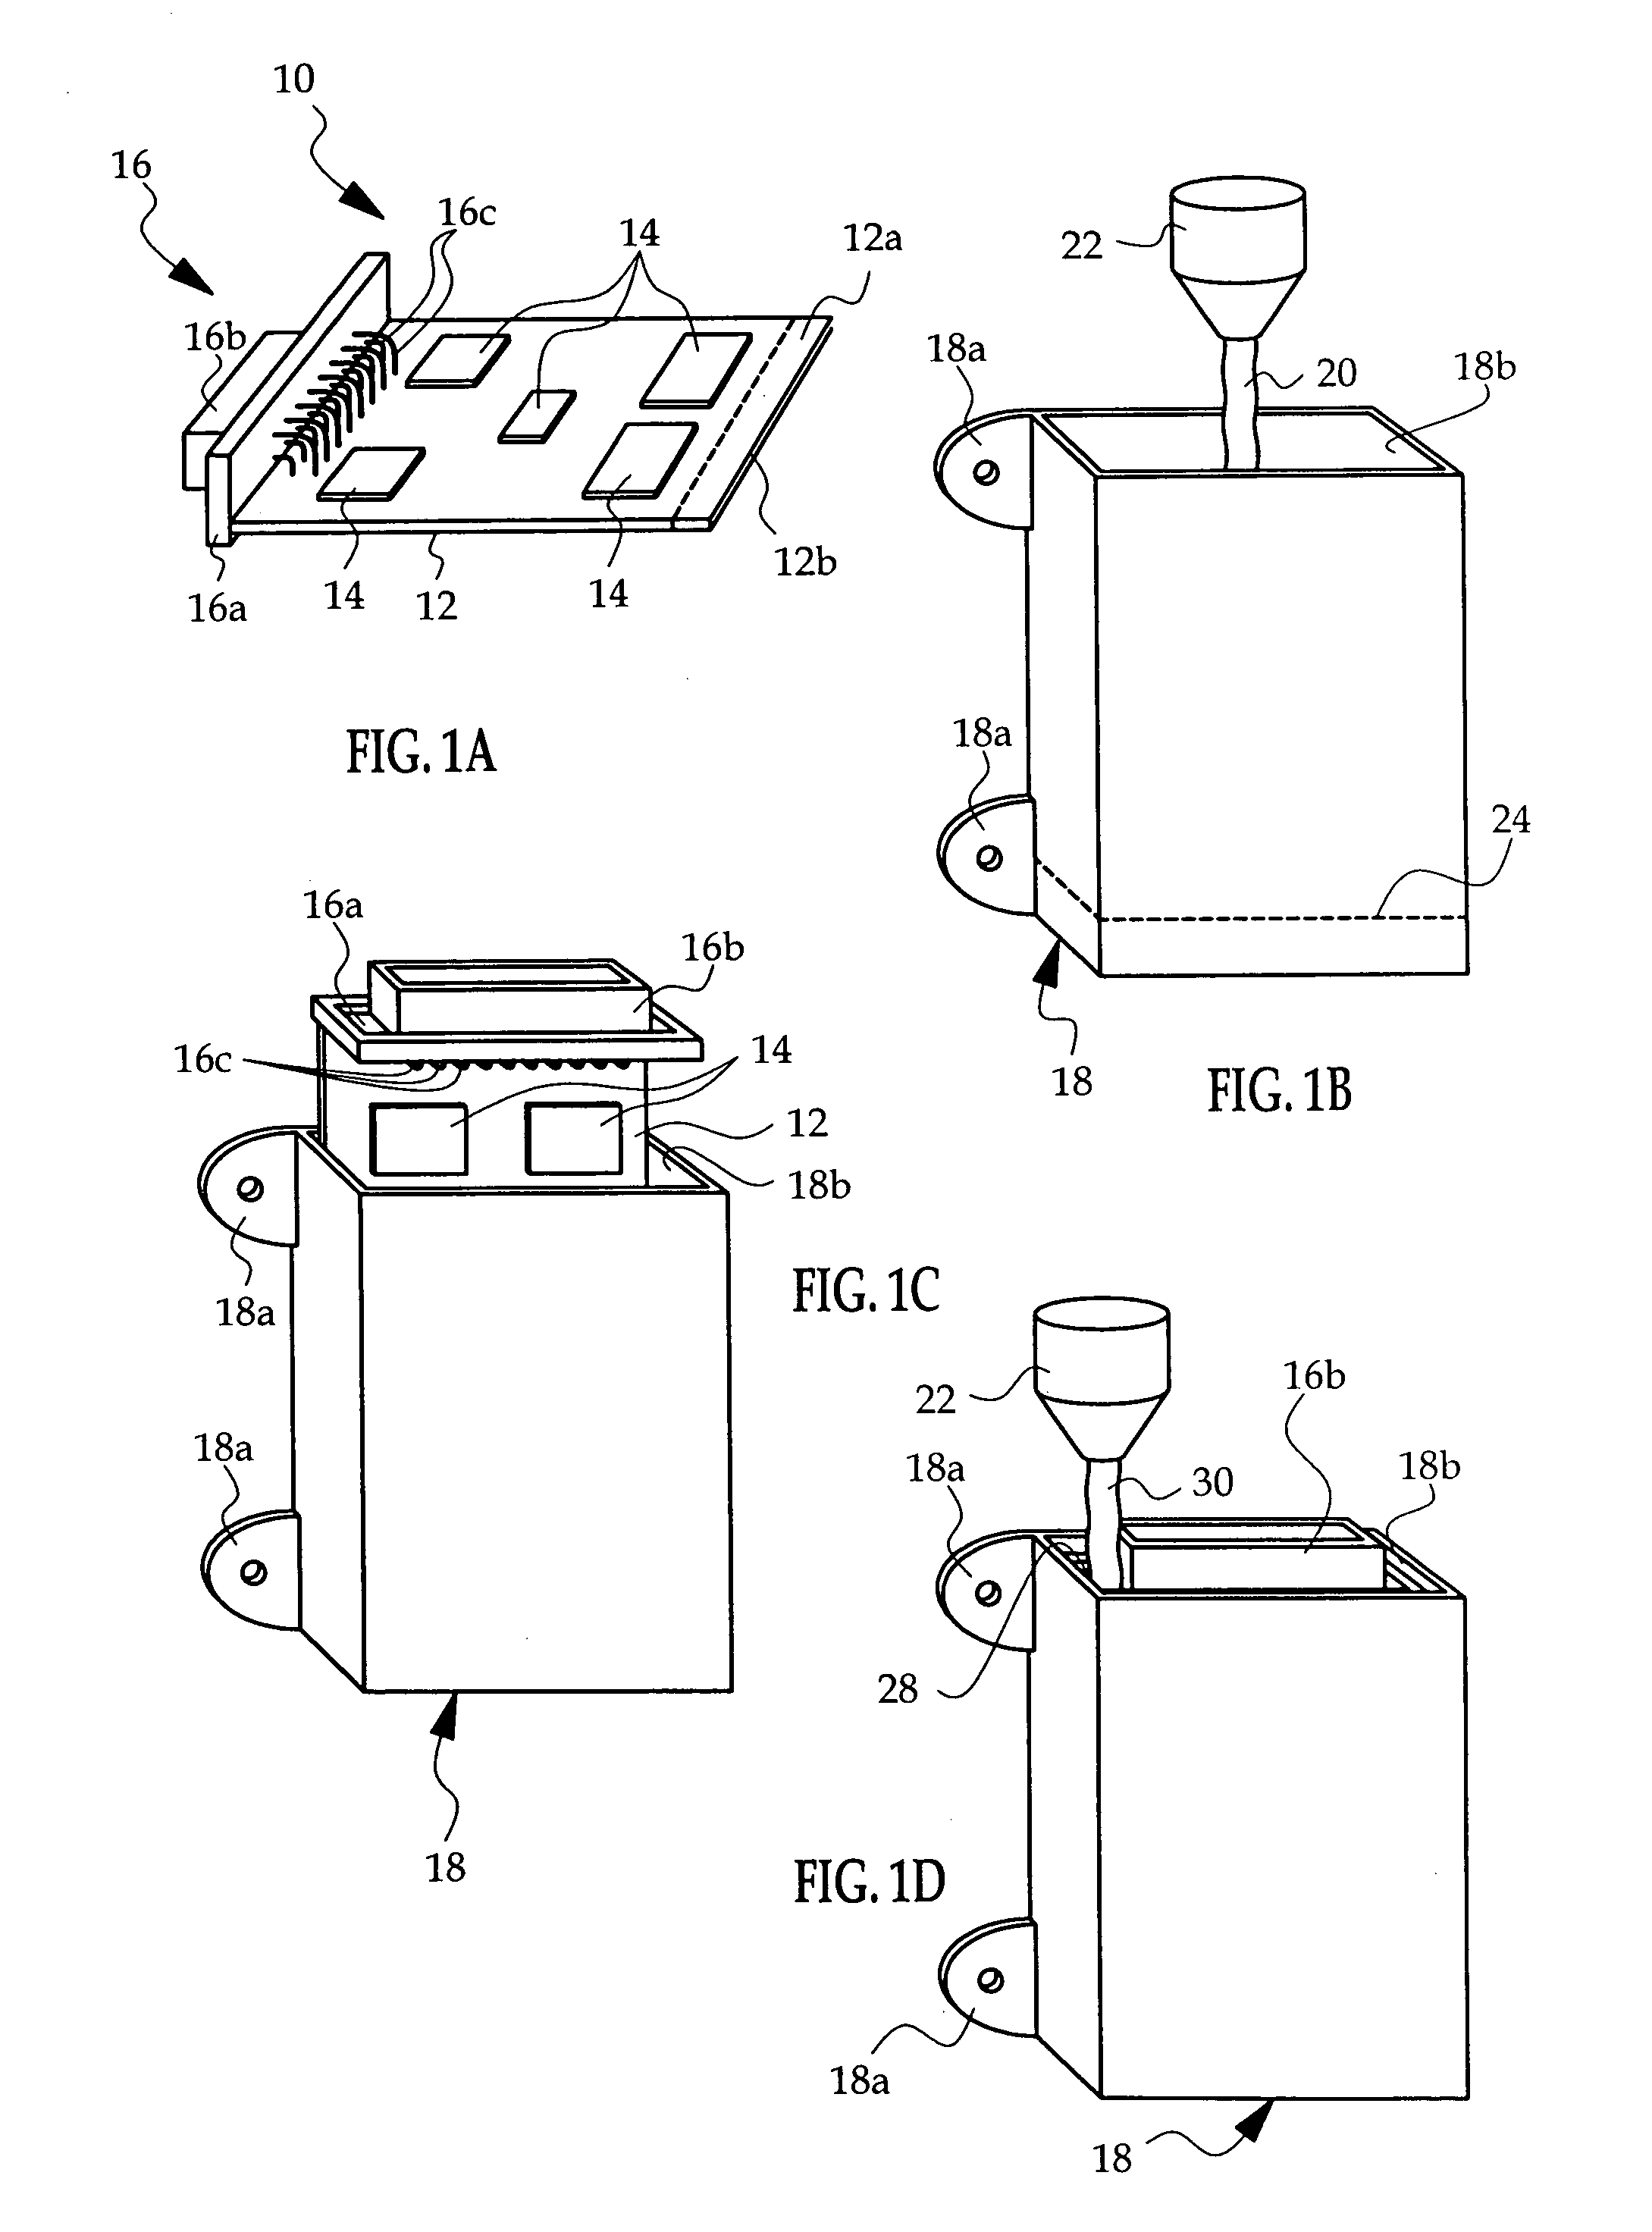 Method of manufacturing a sealed electronic module